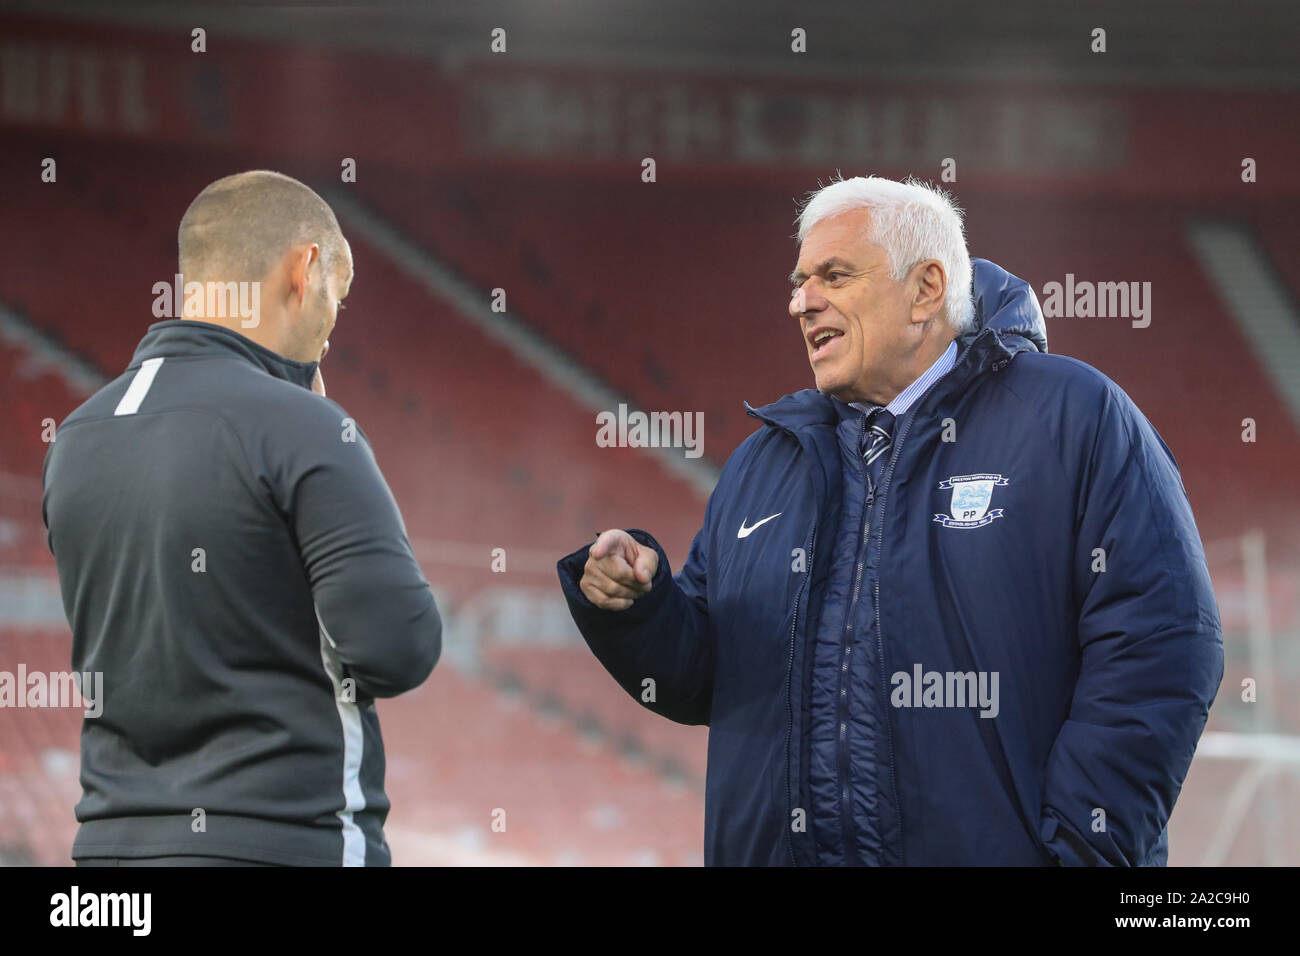 1st October 2019, Riverside Stadium, Middlesbrough, England; Sky Bet Championship, Middlesbrough v Preston North End : Alex Neil  manager of Preston North End and Peter Ridsdale advisor to Trevor Hemmings the owner at Preston North End chat on the pitch as they arrive at the Riverside    Credit: Mark Cosgrove/News Images Stock Photo